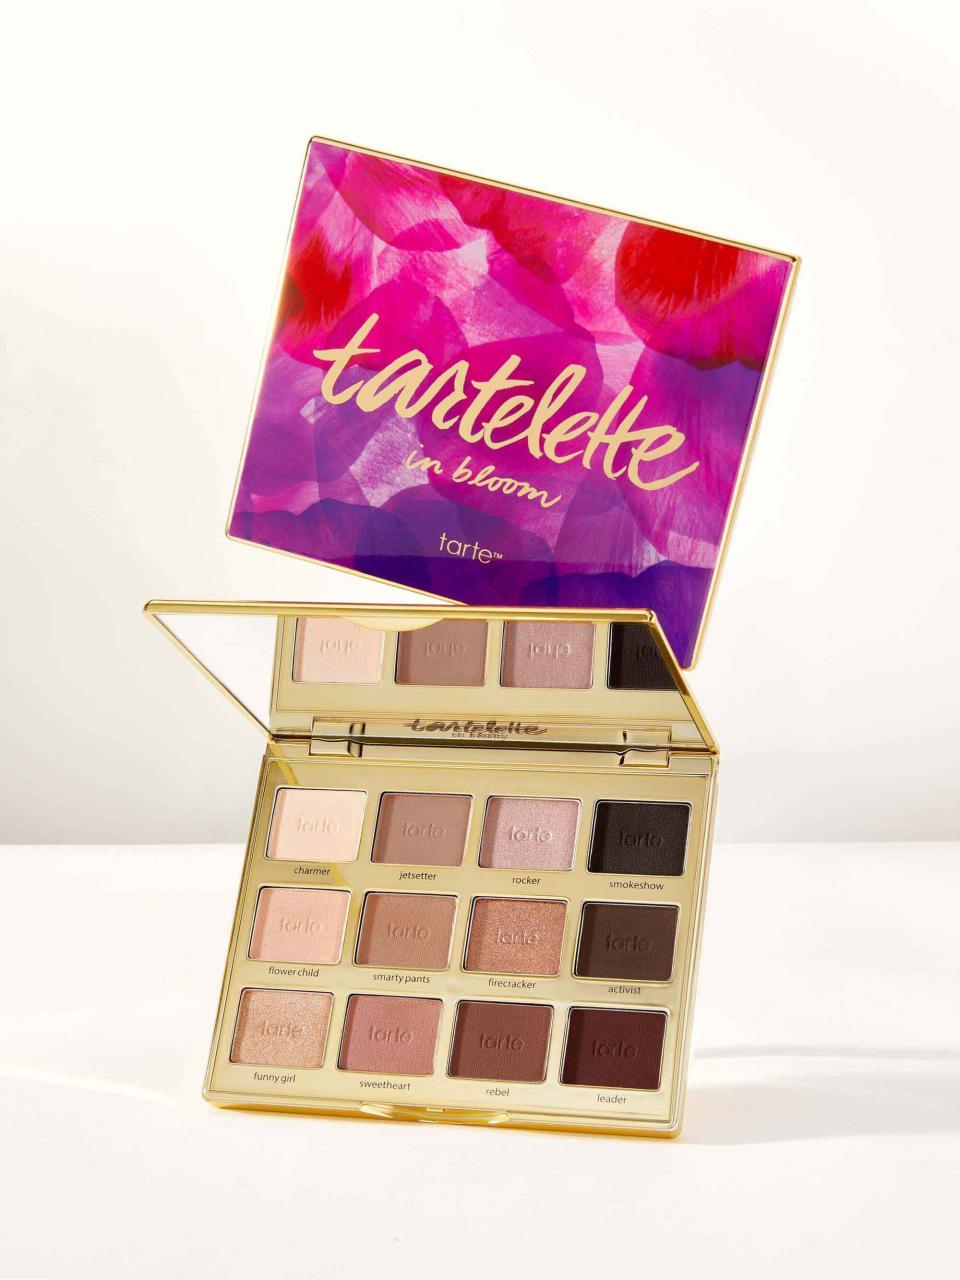 <p><strong>https://tartecosmetics.com/shop/tartelette-in-bloom-amazonian-clay-palette-712.html?vid=846733013999-UN</strong></p><p>tartecosmetics.com</p><p><a href="https://go.redirectingat.com?id=74968X1596630&url=https%3A%2F%2Ftartecosmetics.com%2Fshop%2Ftartelette-in-bloom-amazonian-clay-palette-712.html%23start%3D12&sref=https%3A%2F%2Fwww.harpersbazaar.com%2Fbeauty%2Fskin-care%2Fg41396691%2Fblack-friday-cyber-monday-beauty-deals-2022%2F" rel="nofollow noopener" target="_blank" data-ylk="slk:Shop Now" class="link ">Shop Now</a></p><p>Tarte enthusiasts can save 30 percent sitewide on the brand's pigmented palettes, coveted mascaras, Shape Tape, and more for Cyber Week using the code <strong>CYBERSZN</strong> at checkout. </p><p><em>Featured item: Tartelette in Bloom Amazonian Clay Palette </em></p>